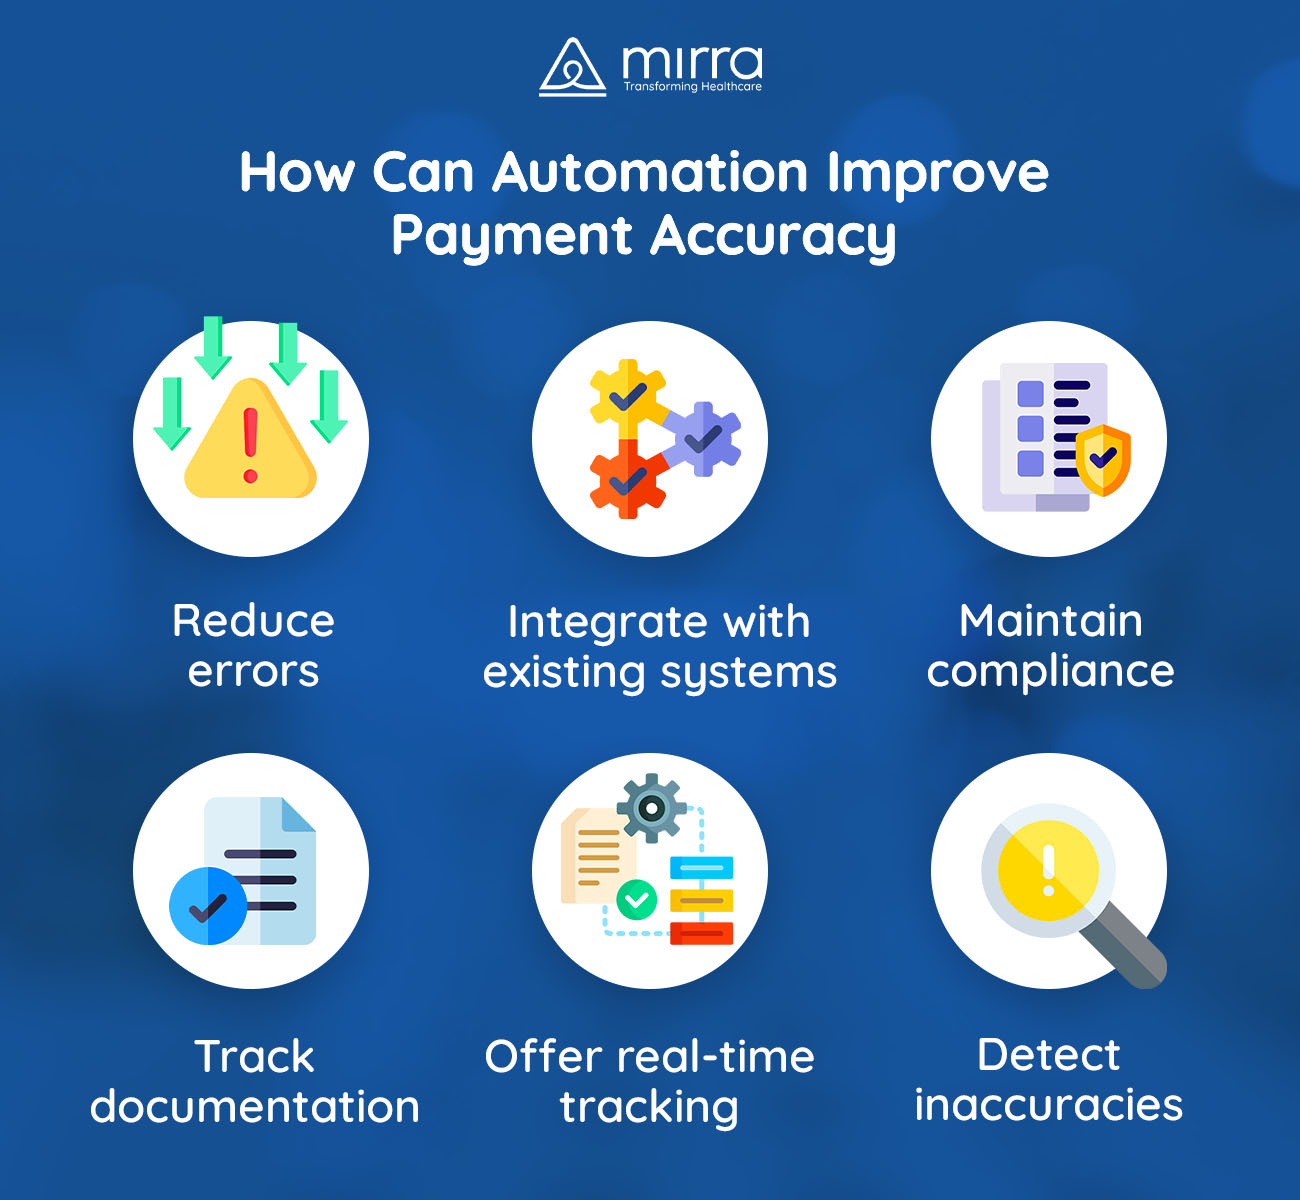 How Can Automation Improve Payment Accuracy